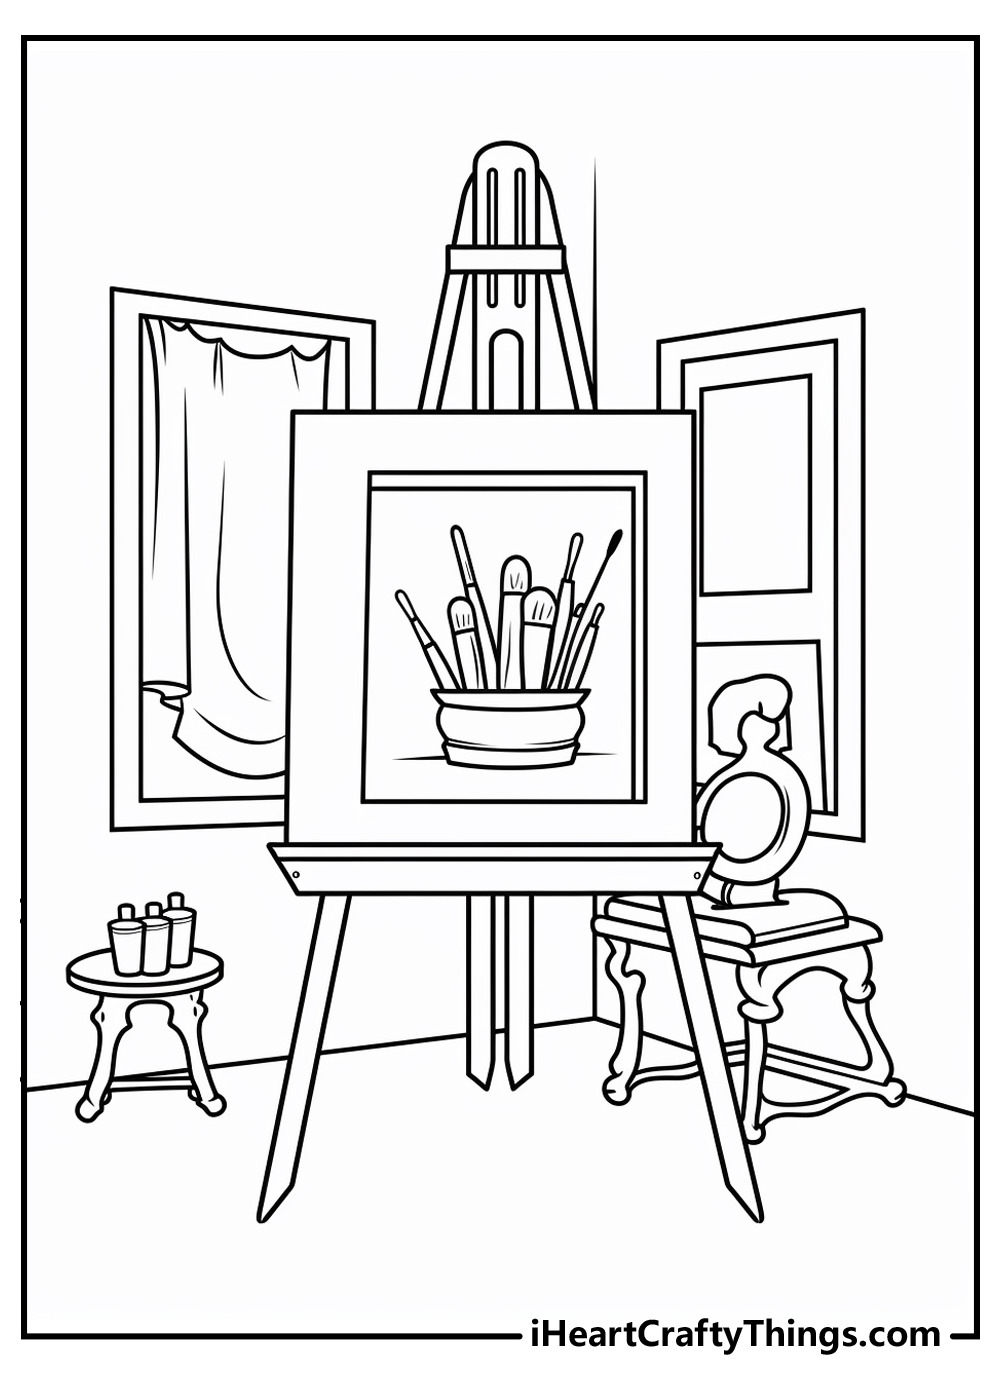 painting tool coloring page  Coloring pages, Painting tools, Painting